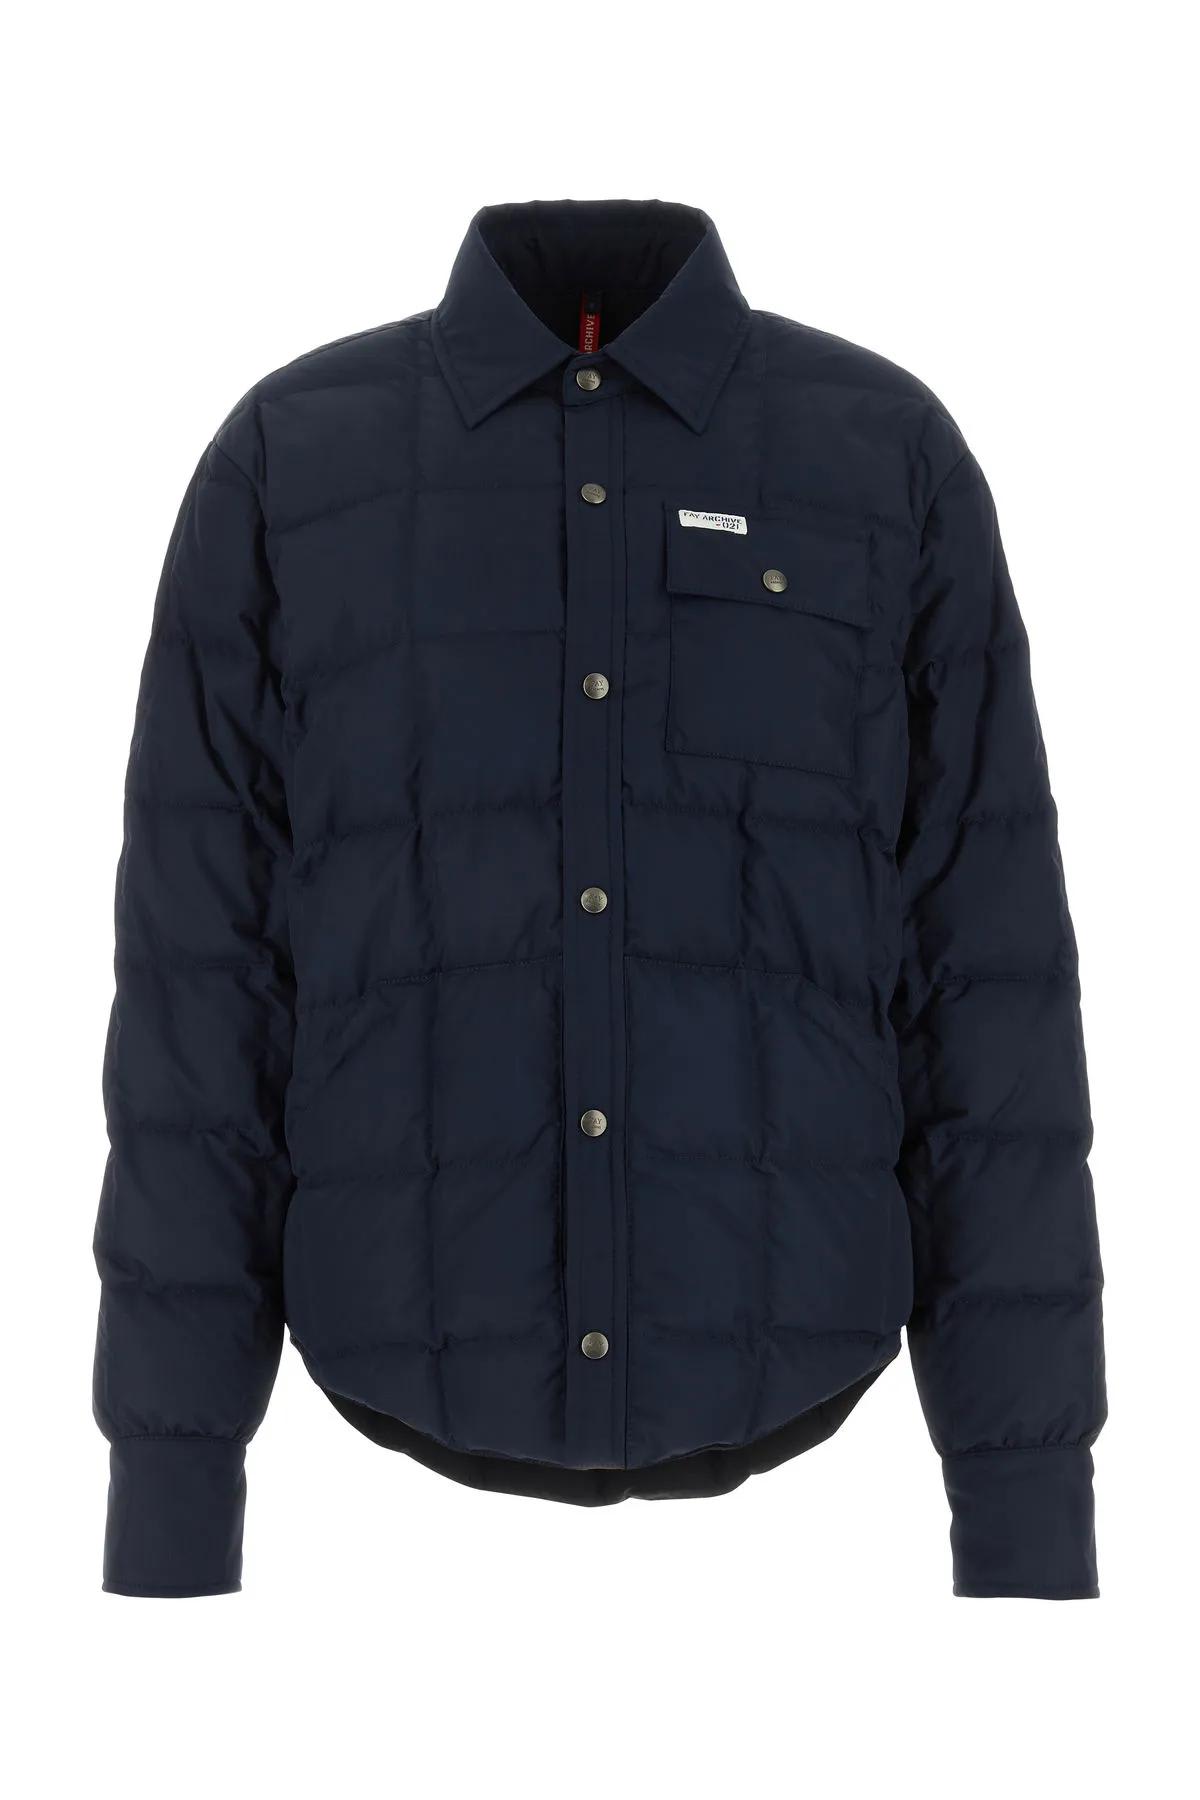 FAY NAVY BLUE POLYESTER DOWN JACKET